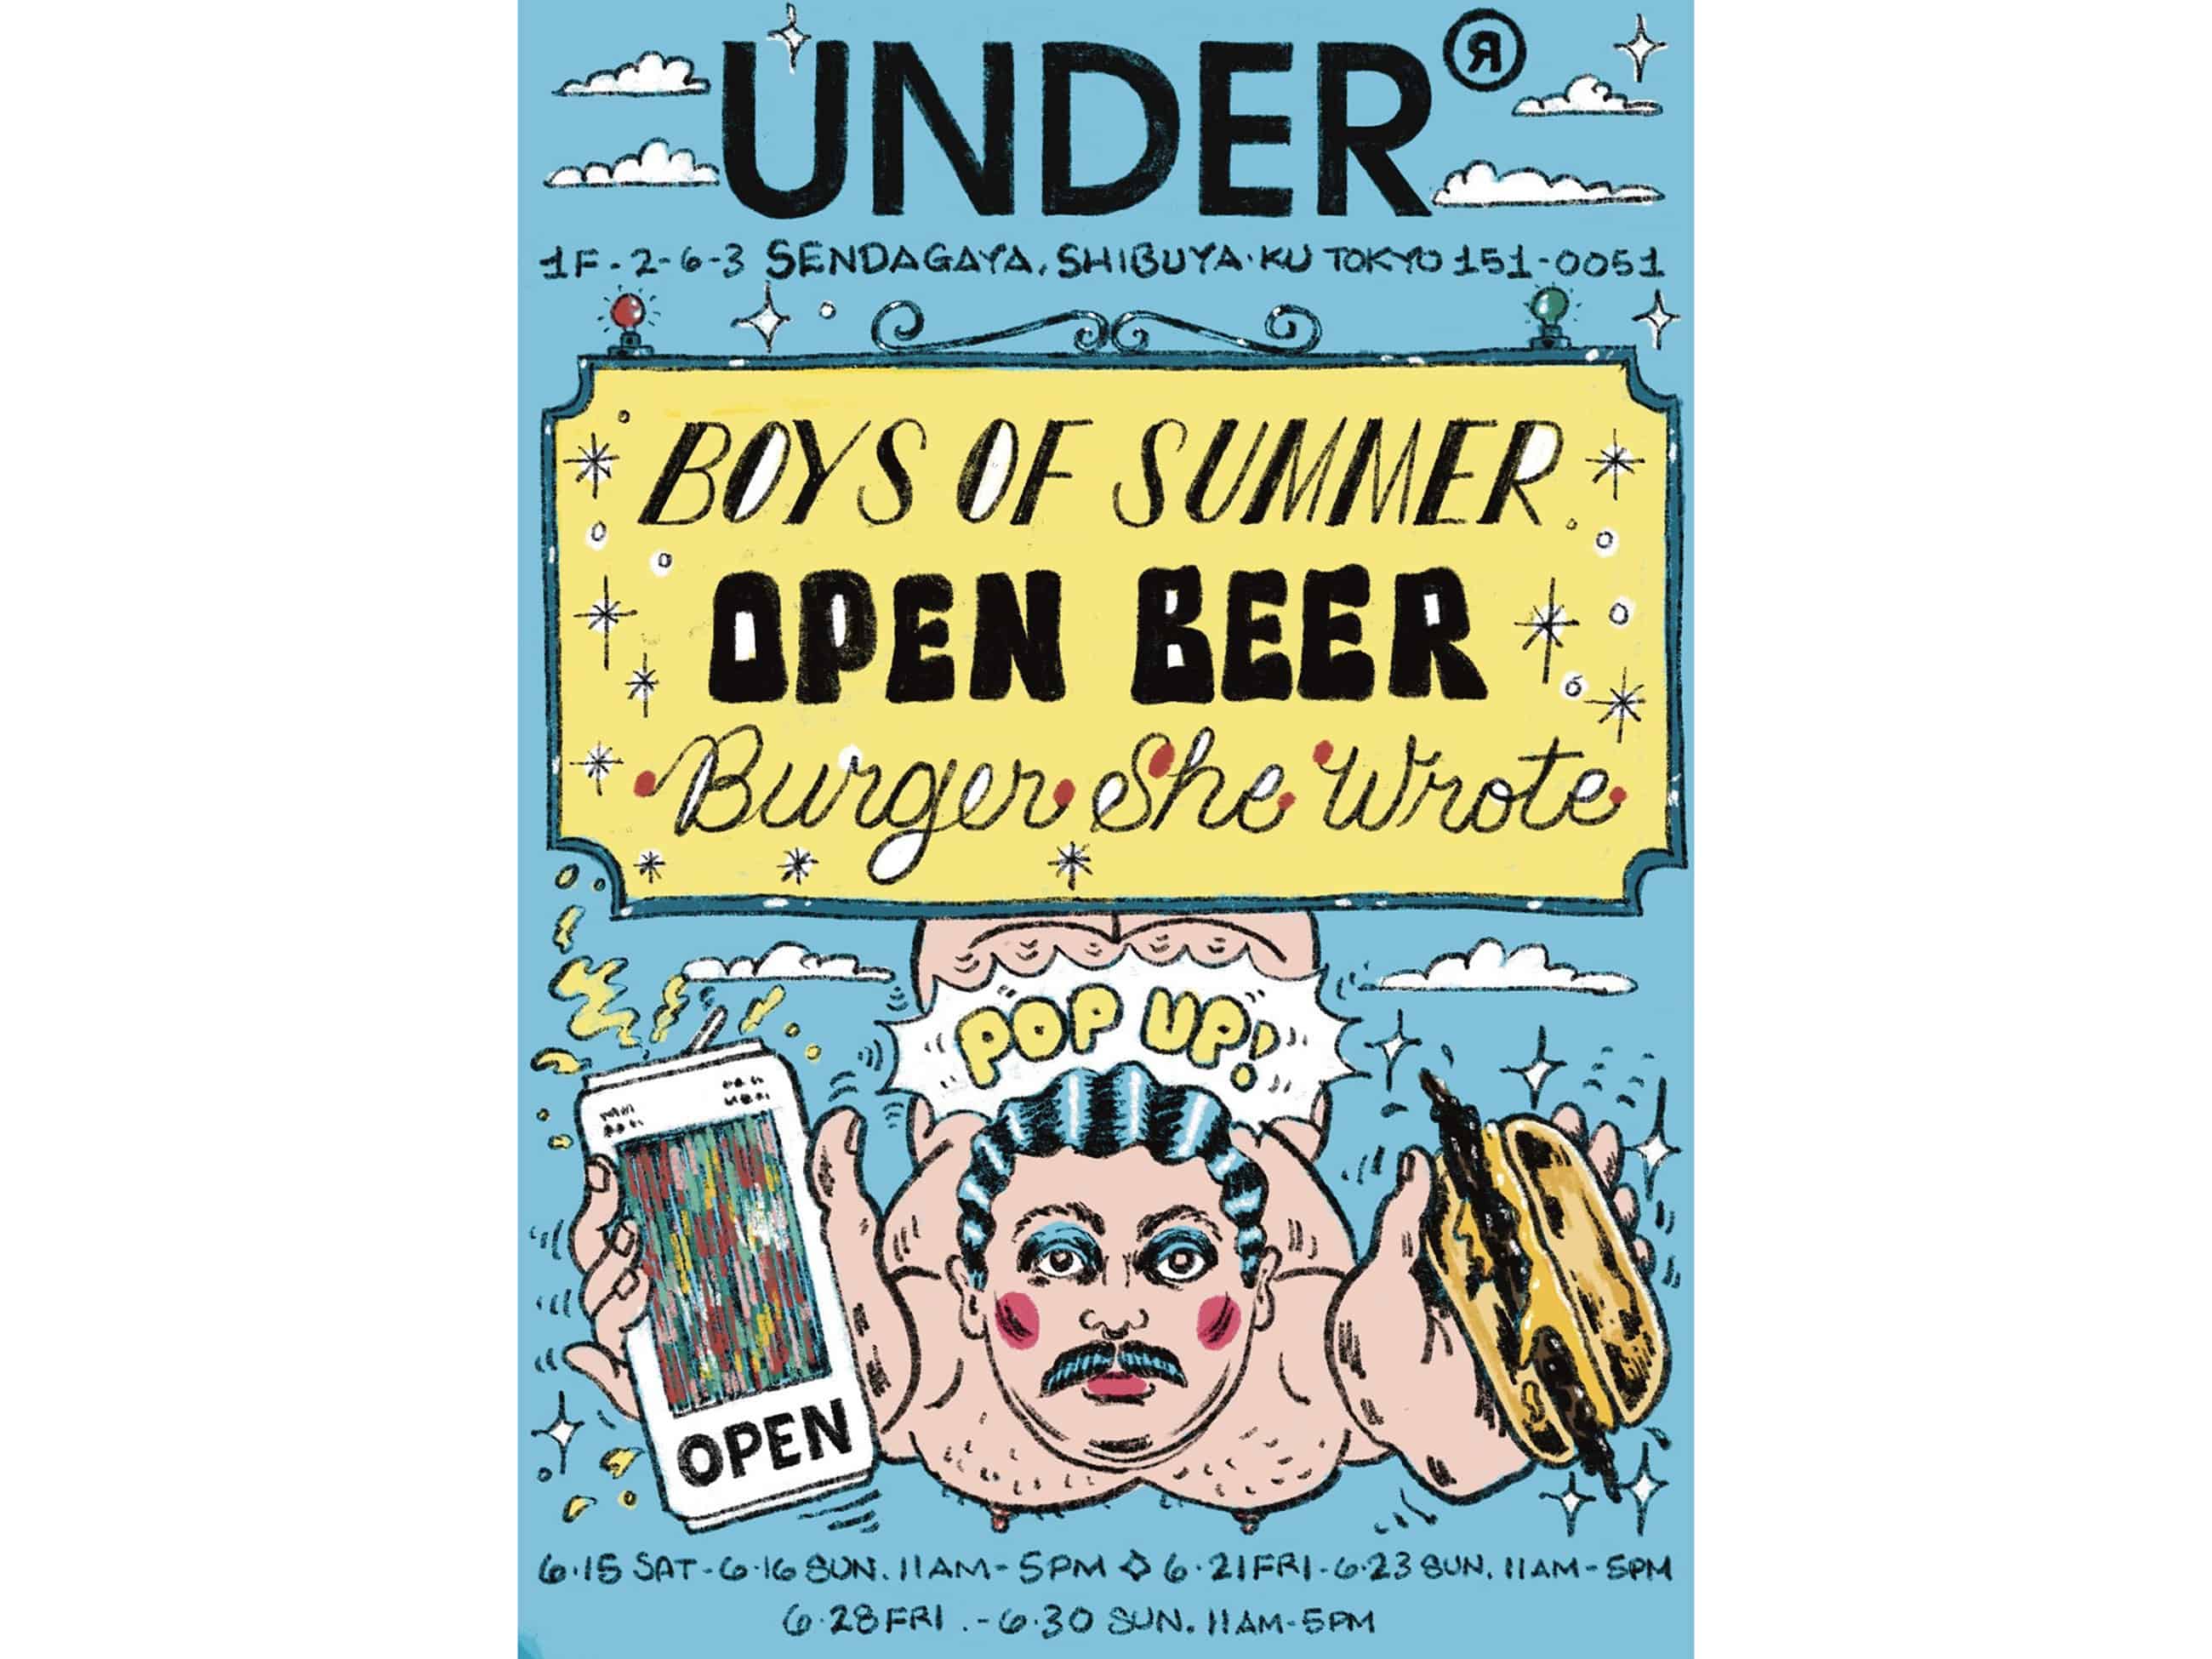 BOYS OF SUMMER・OPEN BEER・BURGER SHE WROTE　POP UP STORE 限定アイテム販売方法のお知らせ